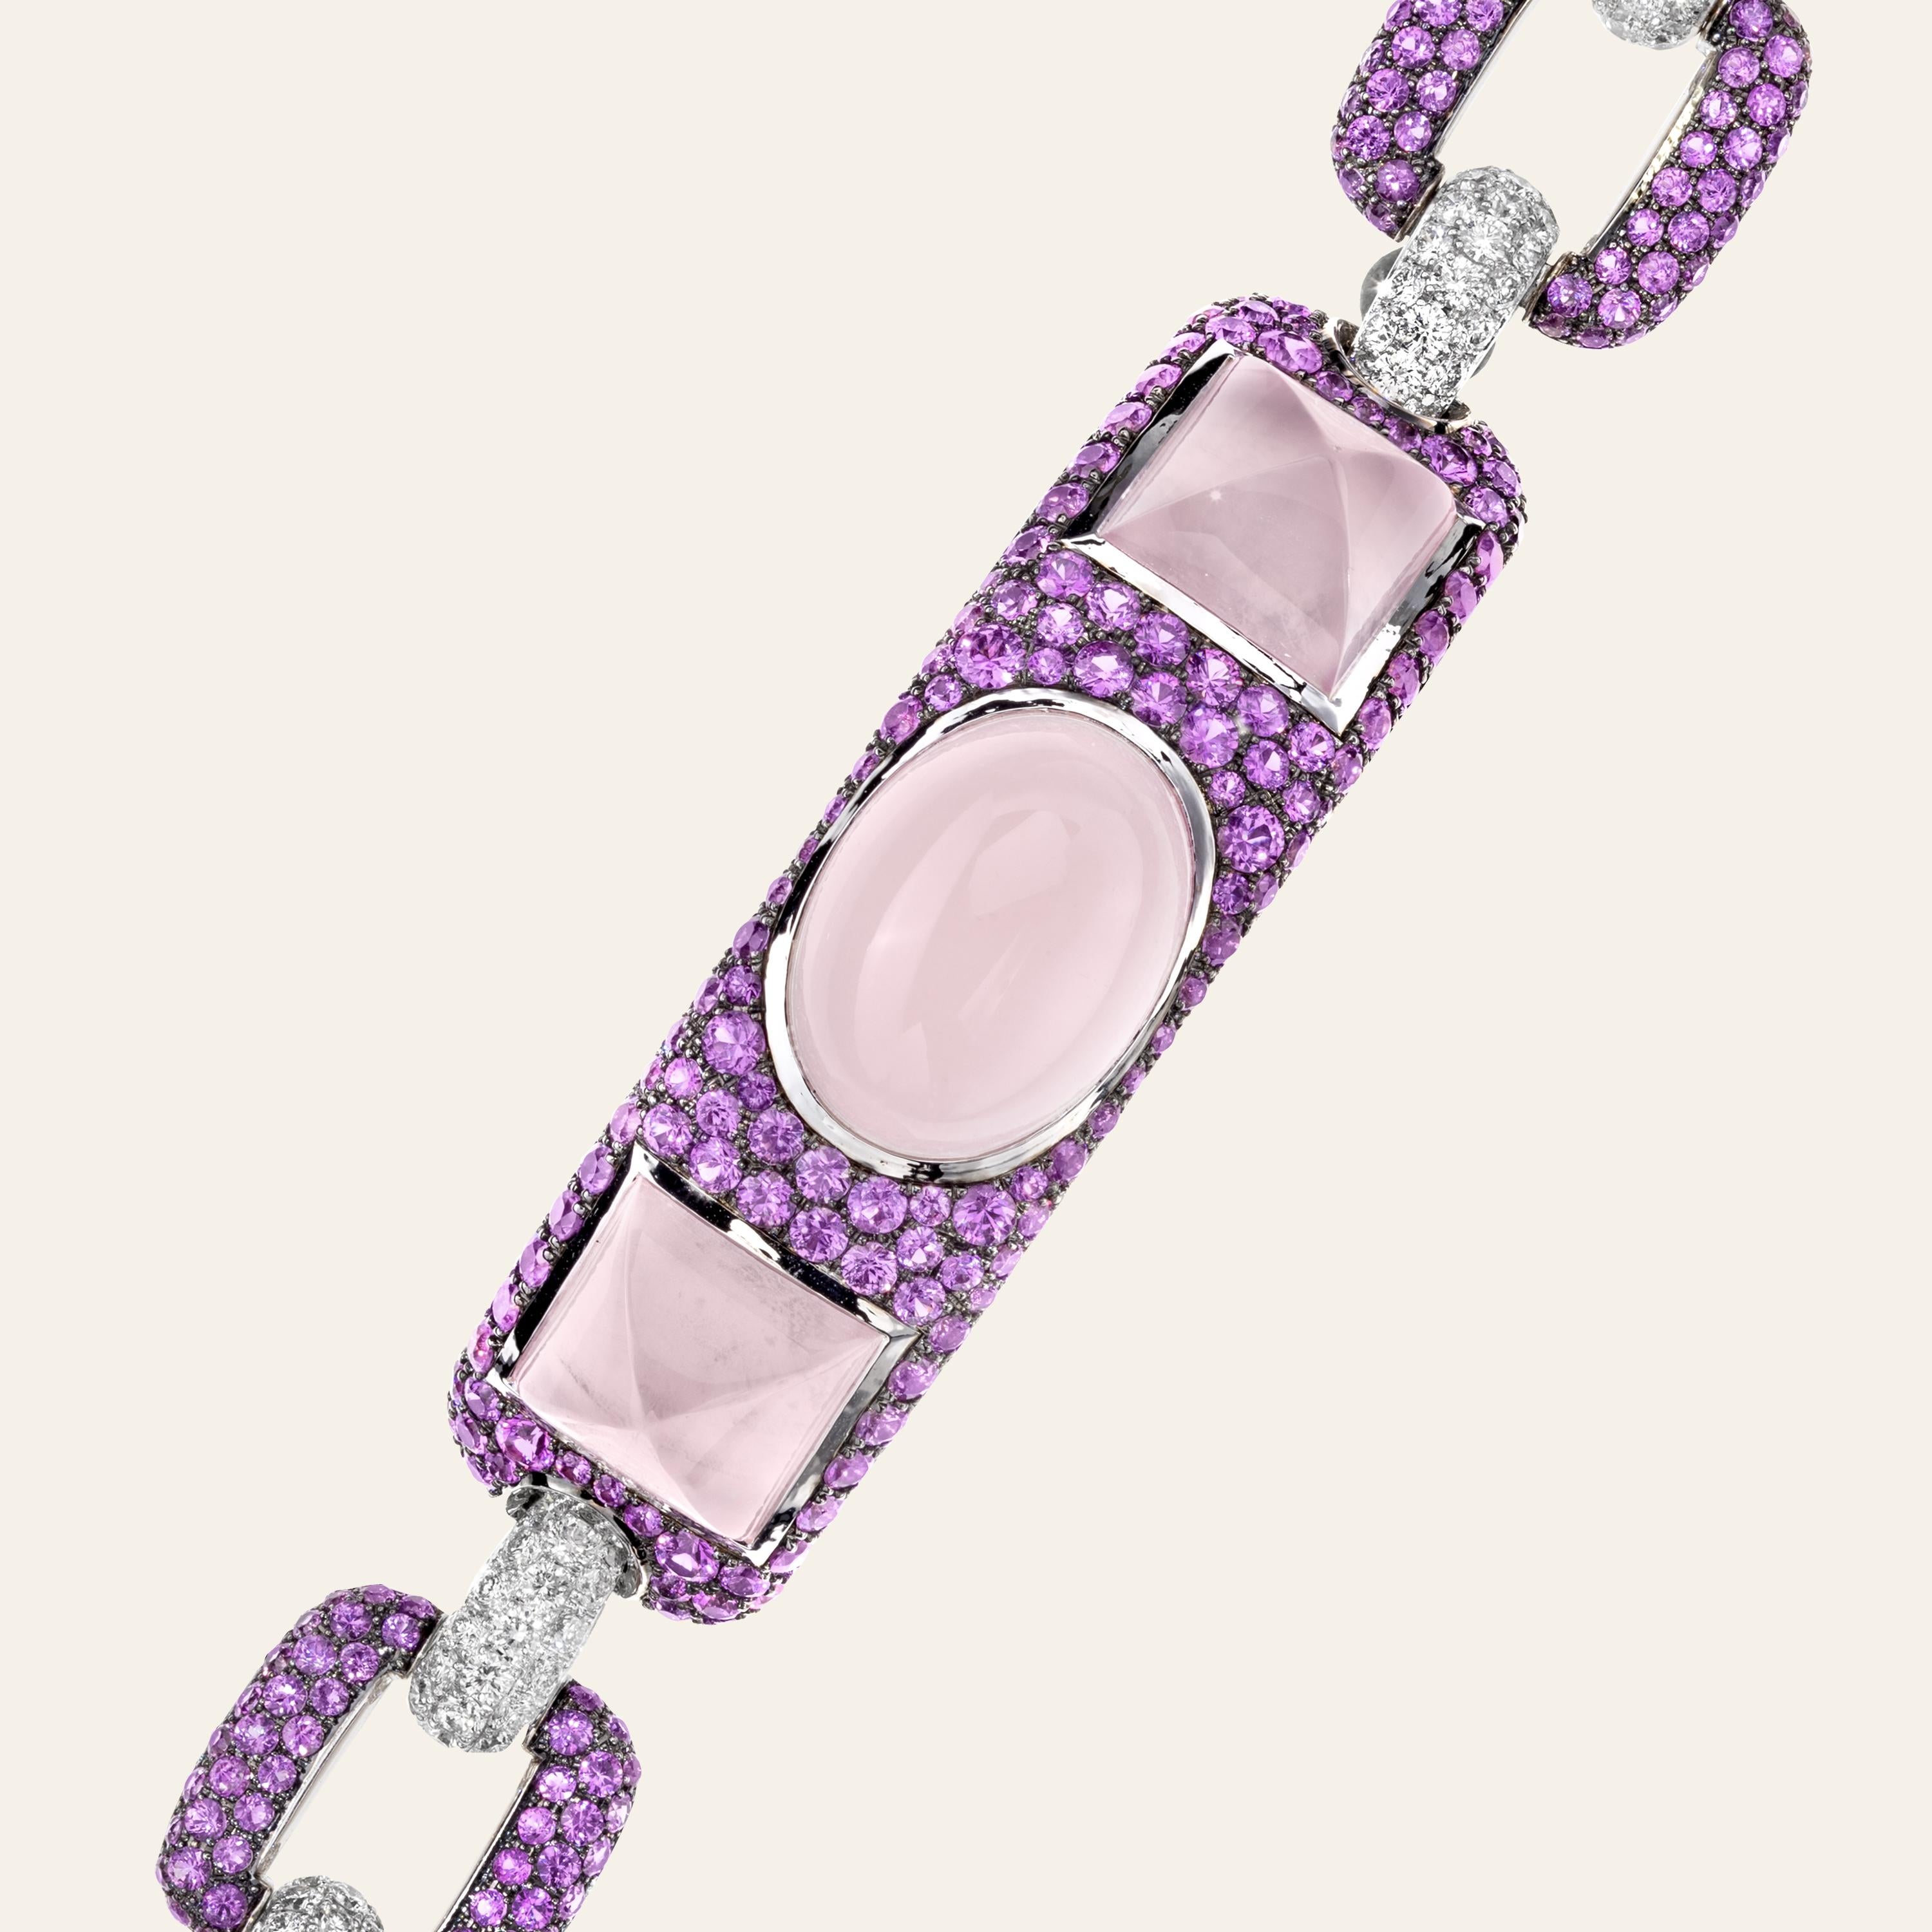 Sabbadini Pink Quartz & Sapphire Cuff Bracelet 
18k White gold bracelet, cabochon pink quartzes, pink sapphire pavé 12,01ct and diamond pavé 2,60ct. Gold 32,53
Handmade & designed in Milan, in Via Montenapoleone.
This item comes directly from the